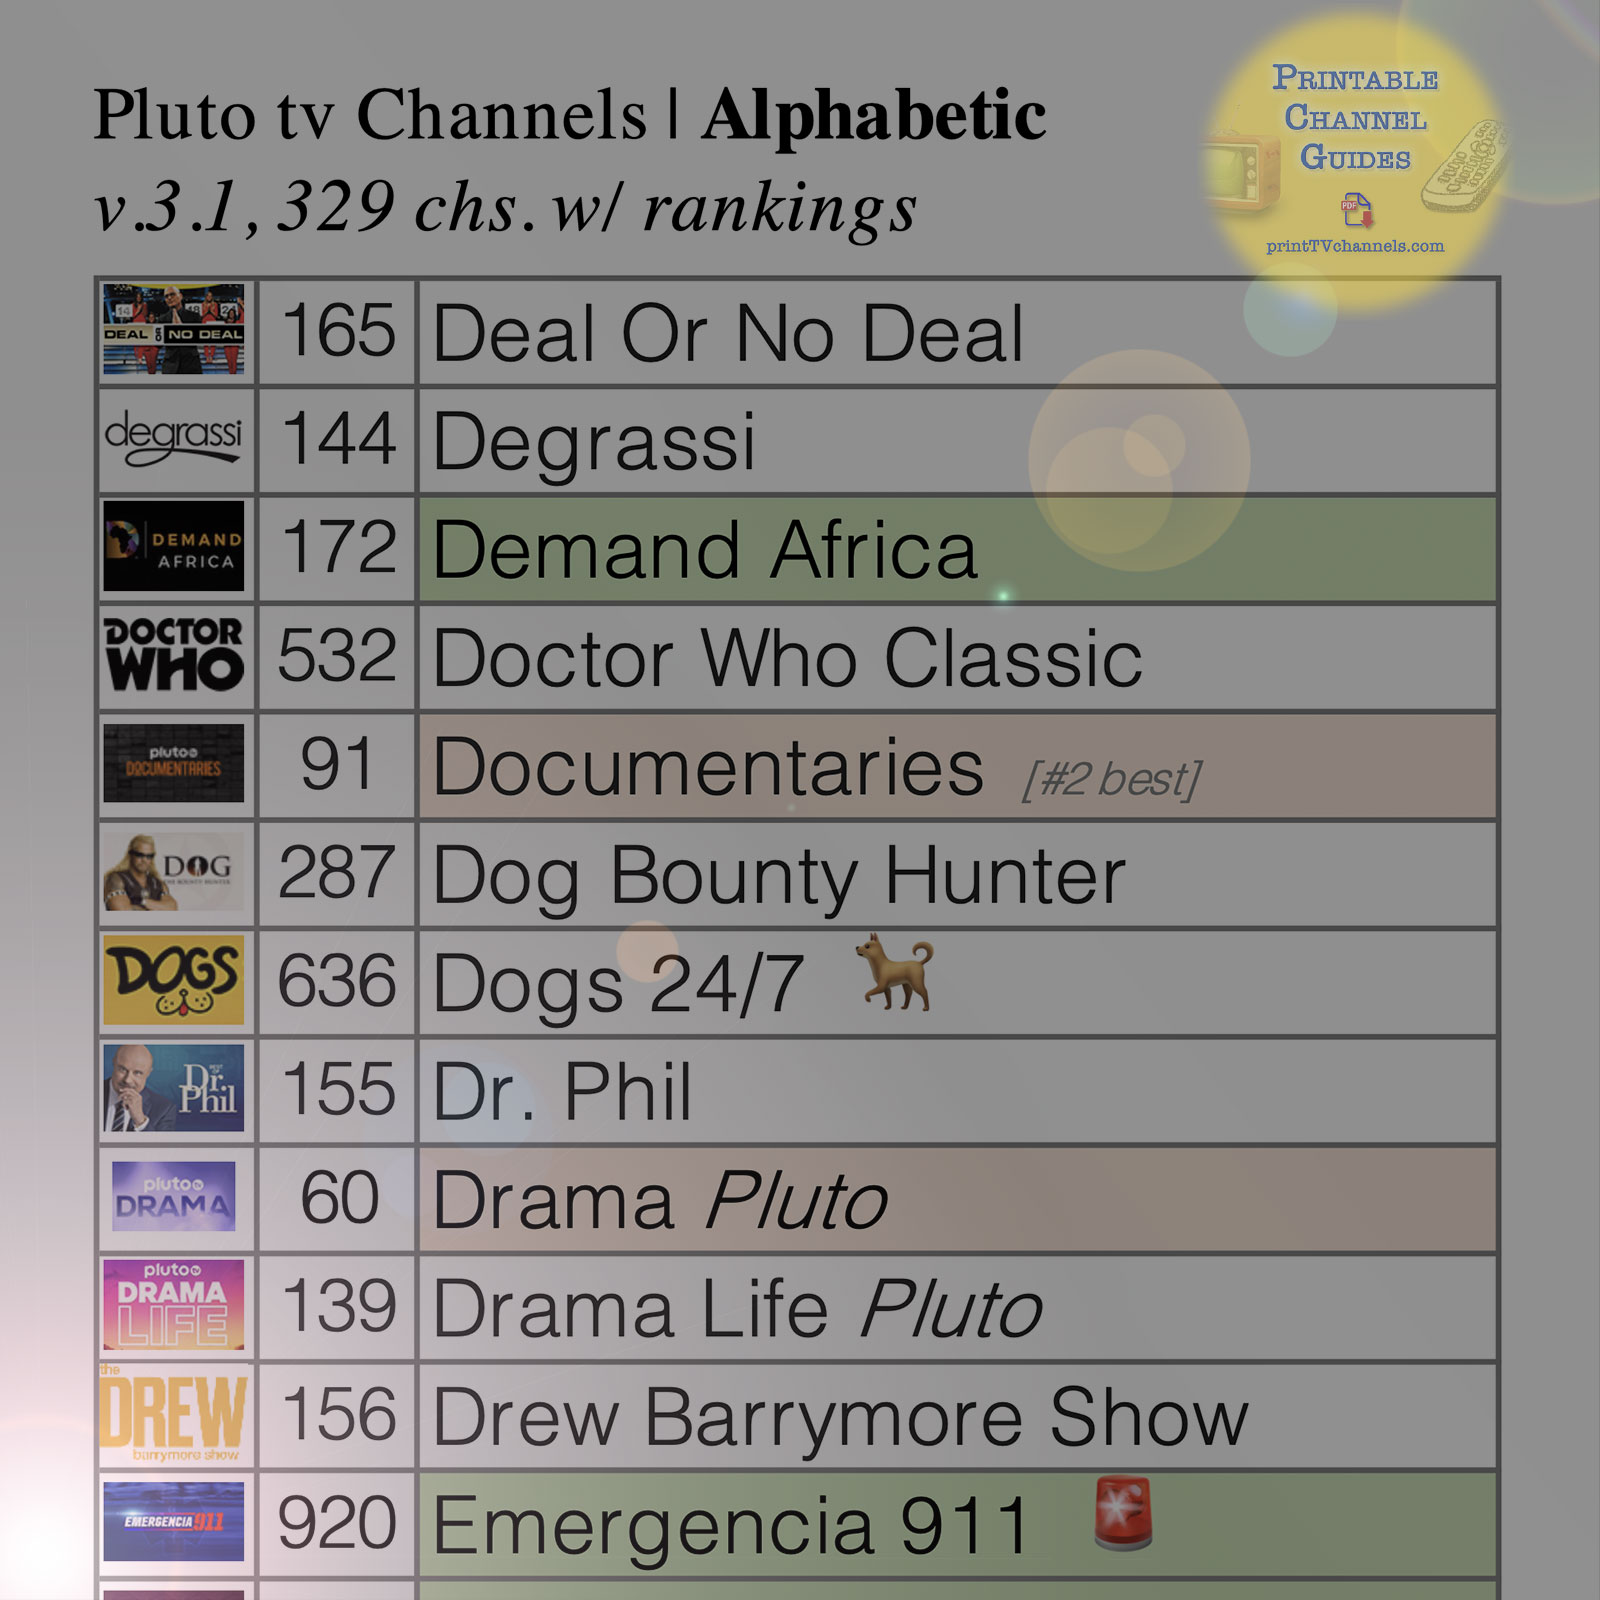 Pluto TV Channels-2022 by Printable TV Channel Guides